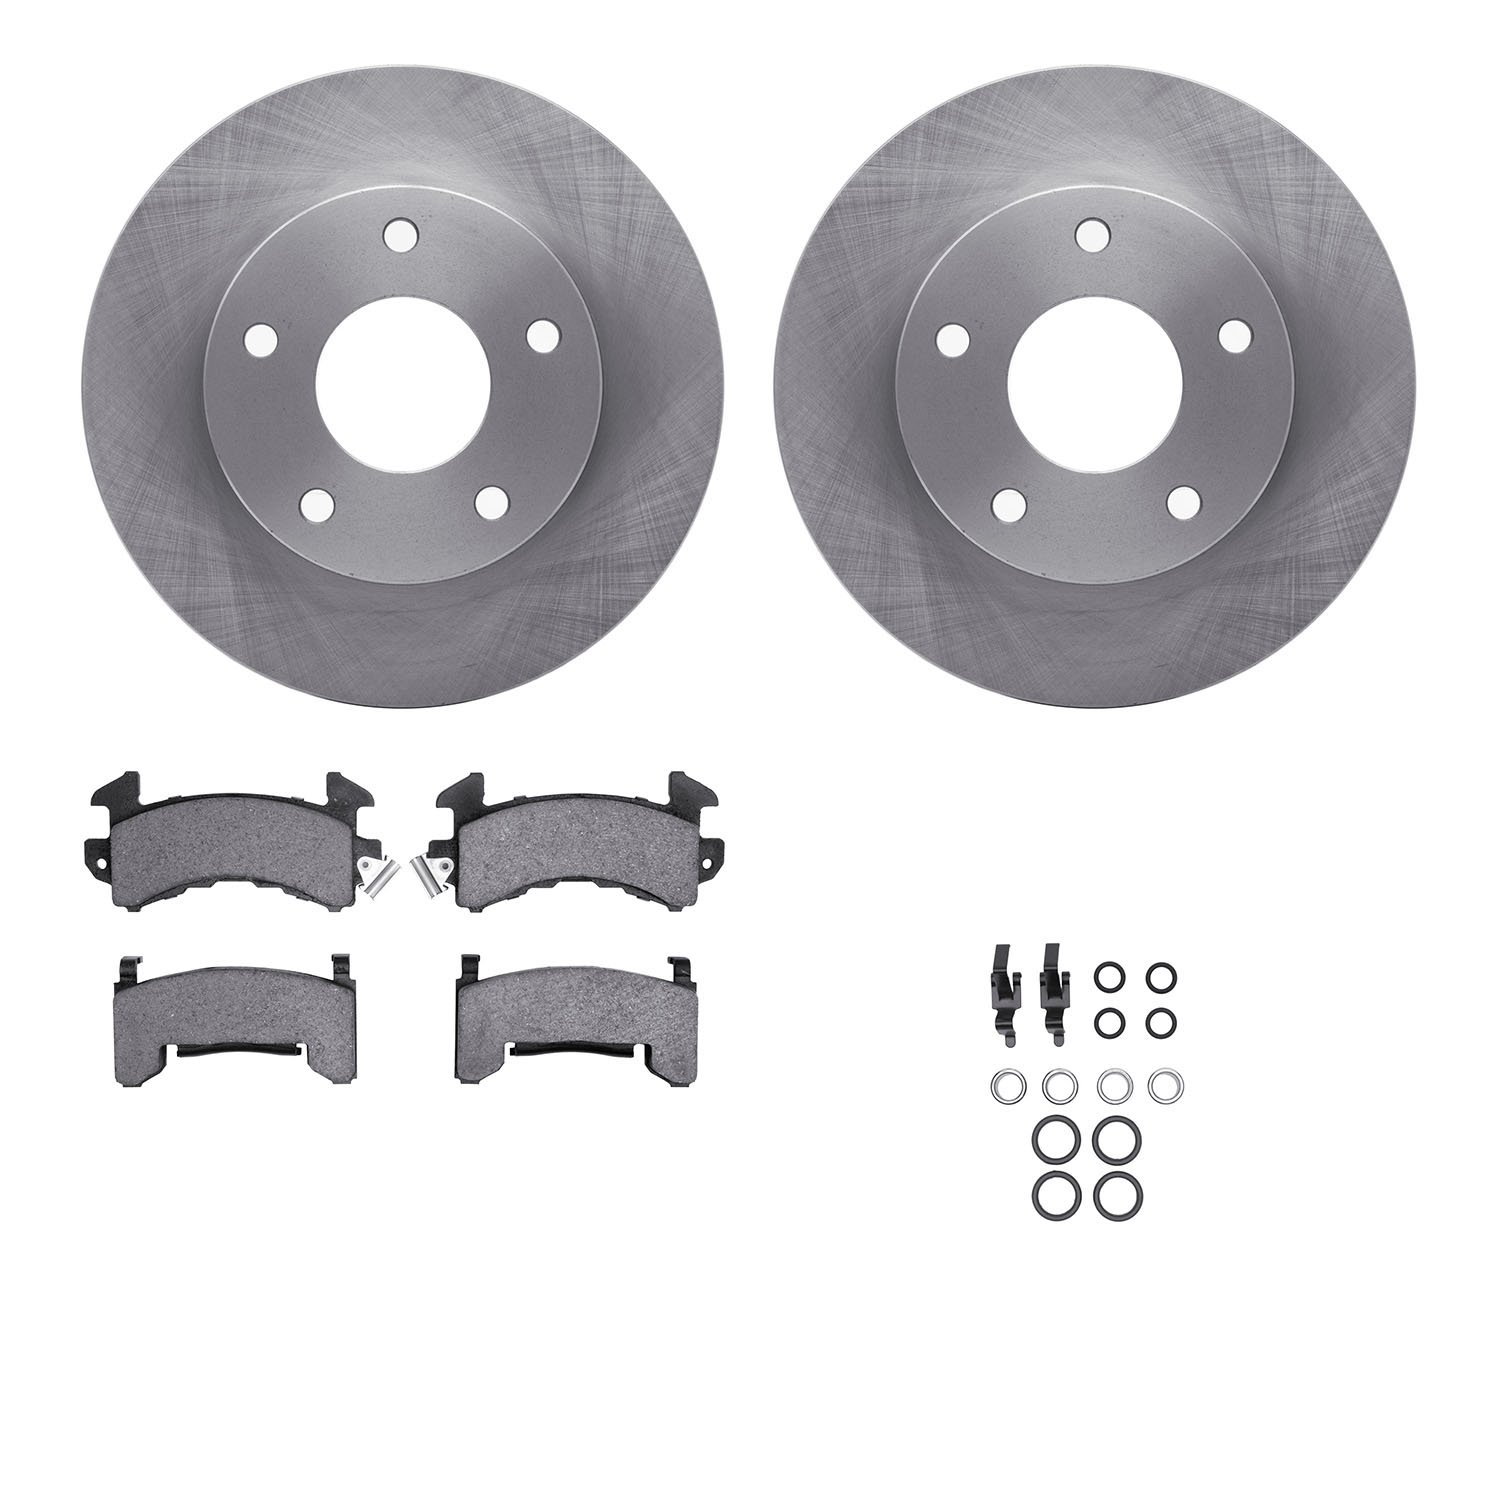 6412-48004 Brake Rotors with Ultimate-Duty Brake Pads Kit & Hardware, 1979-1998 GM, Position: Front